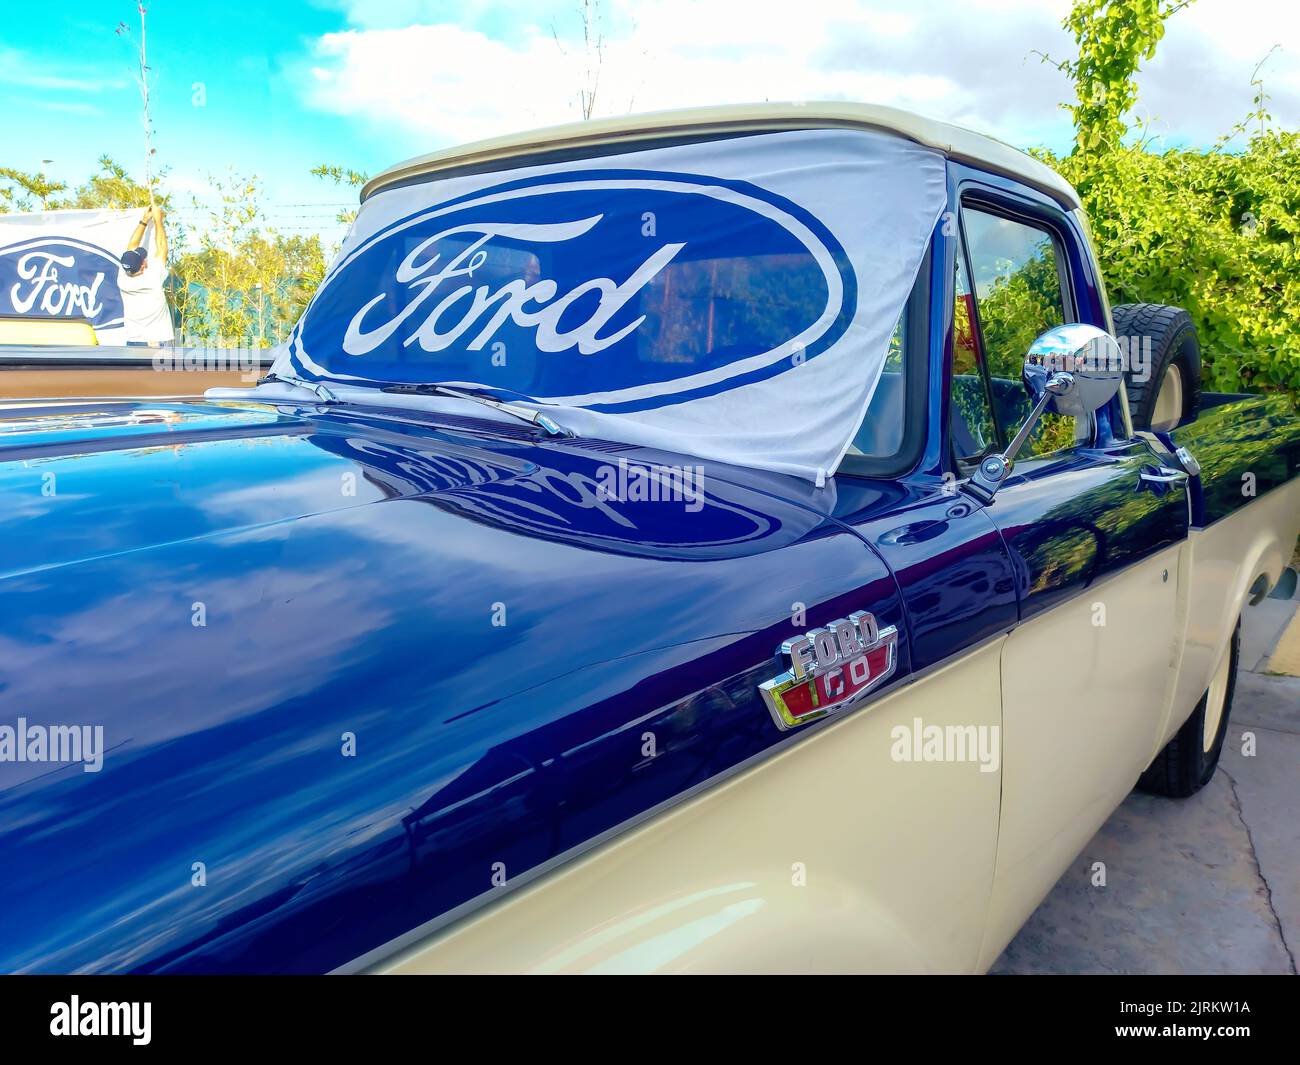 Ford blue oval logo and brand on the windshield of an old F100 V8 utility pickup truck 1963. Expo Fierros 2022 classic car show Stock Photo